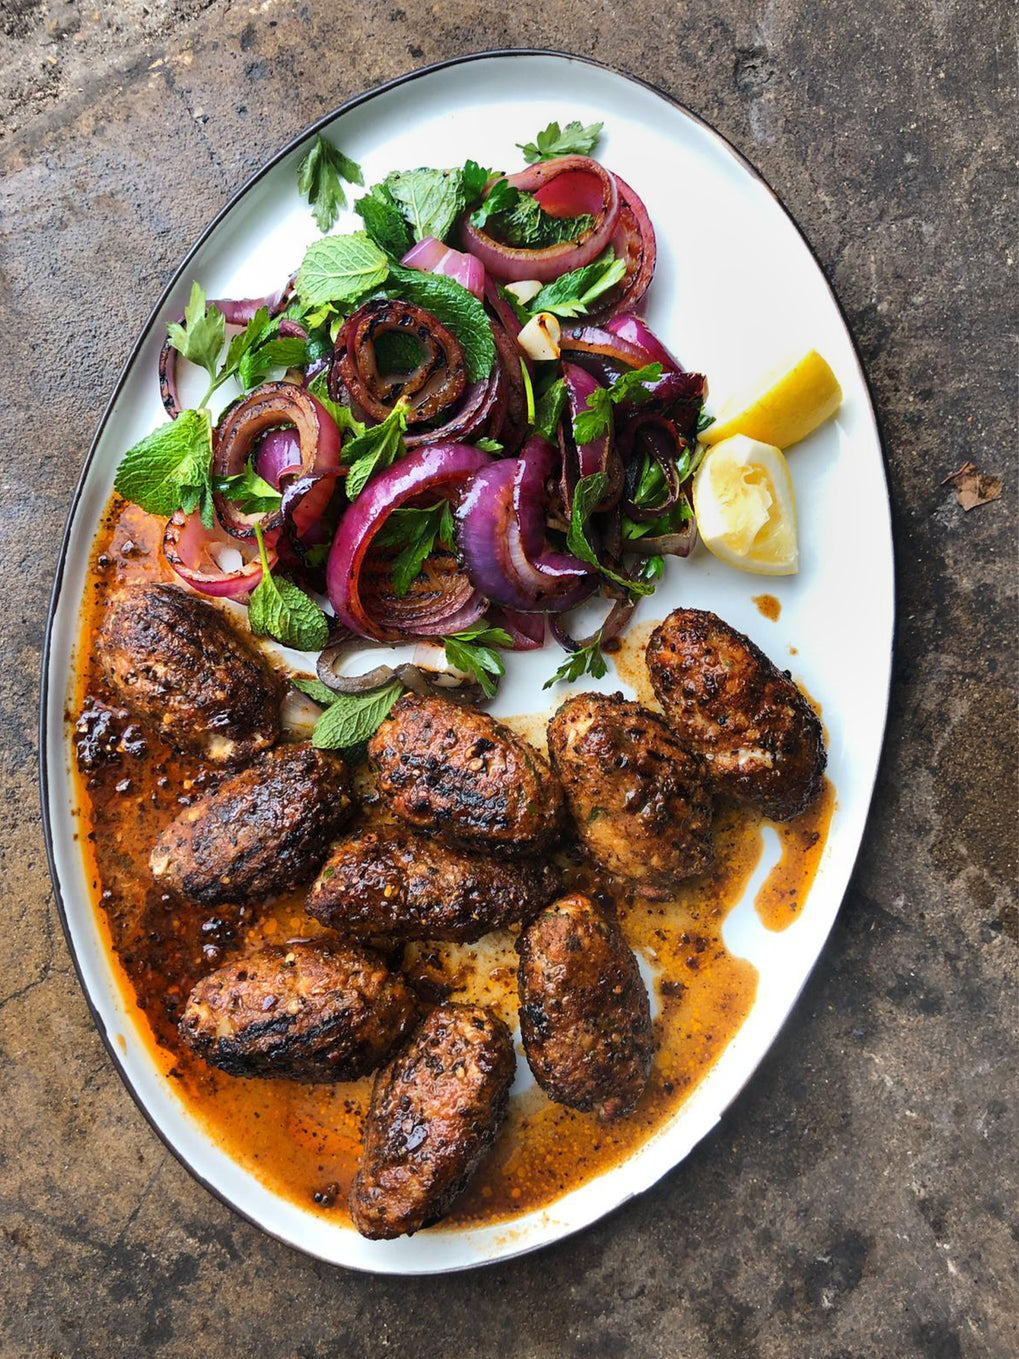 Coffee and chilli chicken koftas with onions